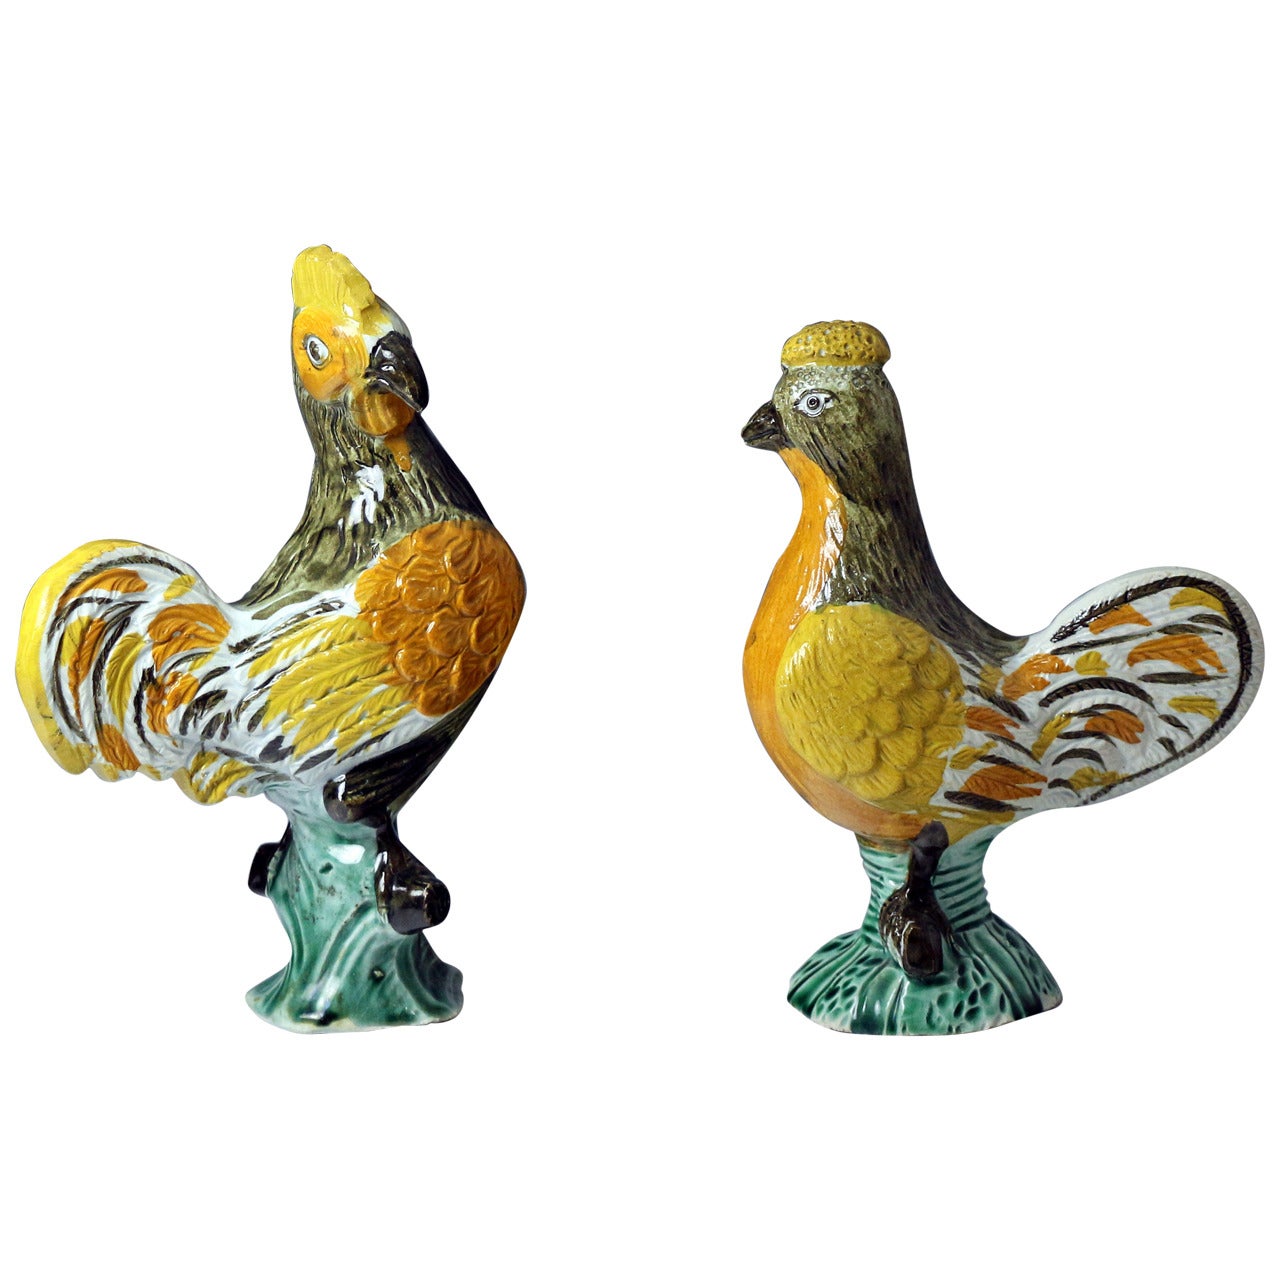 Pair of Prattware English Pottery Figures of a Rooster and Hen